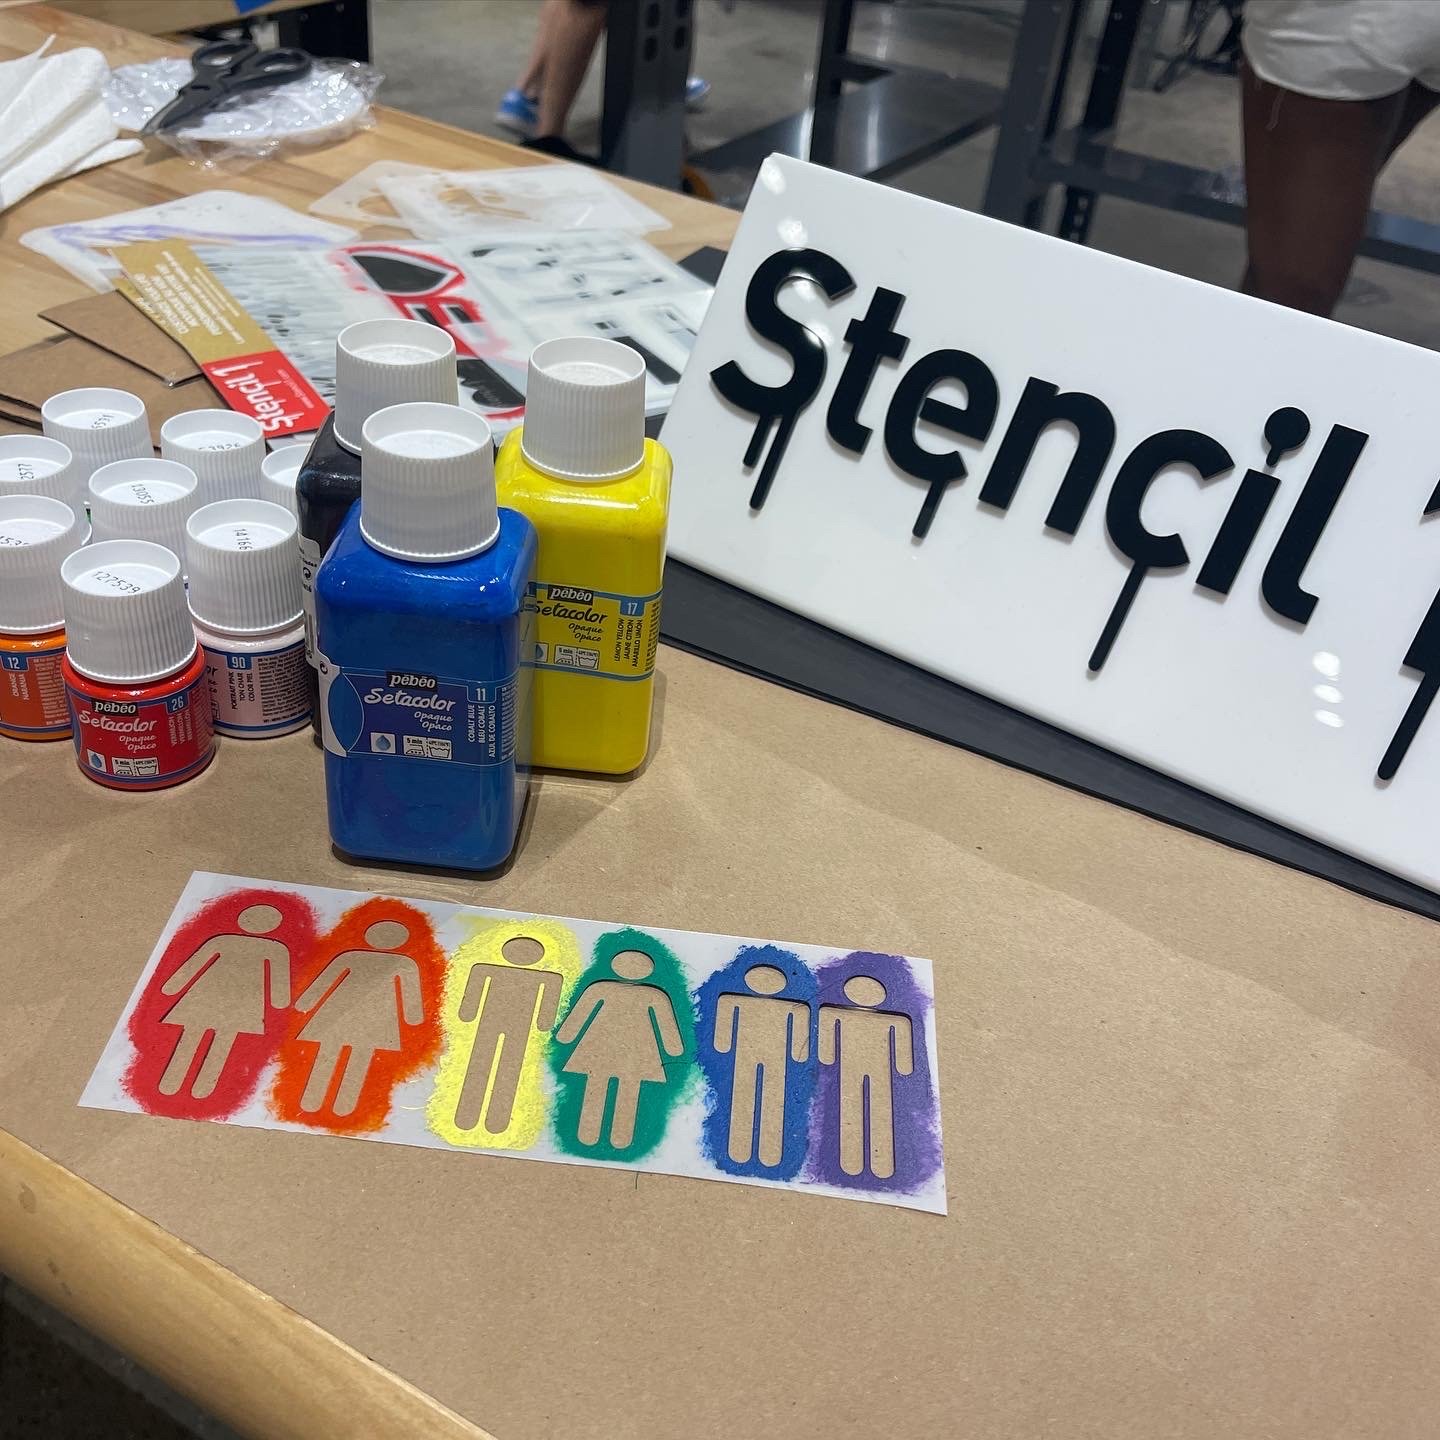 Pride crafting stencils and supplies